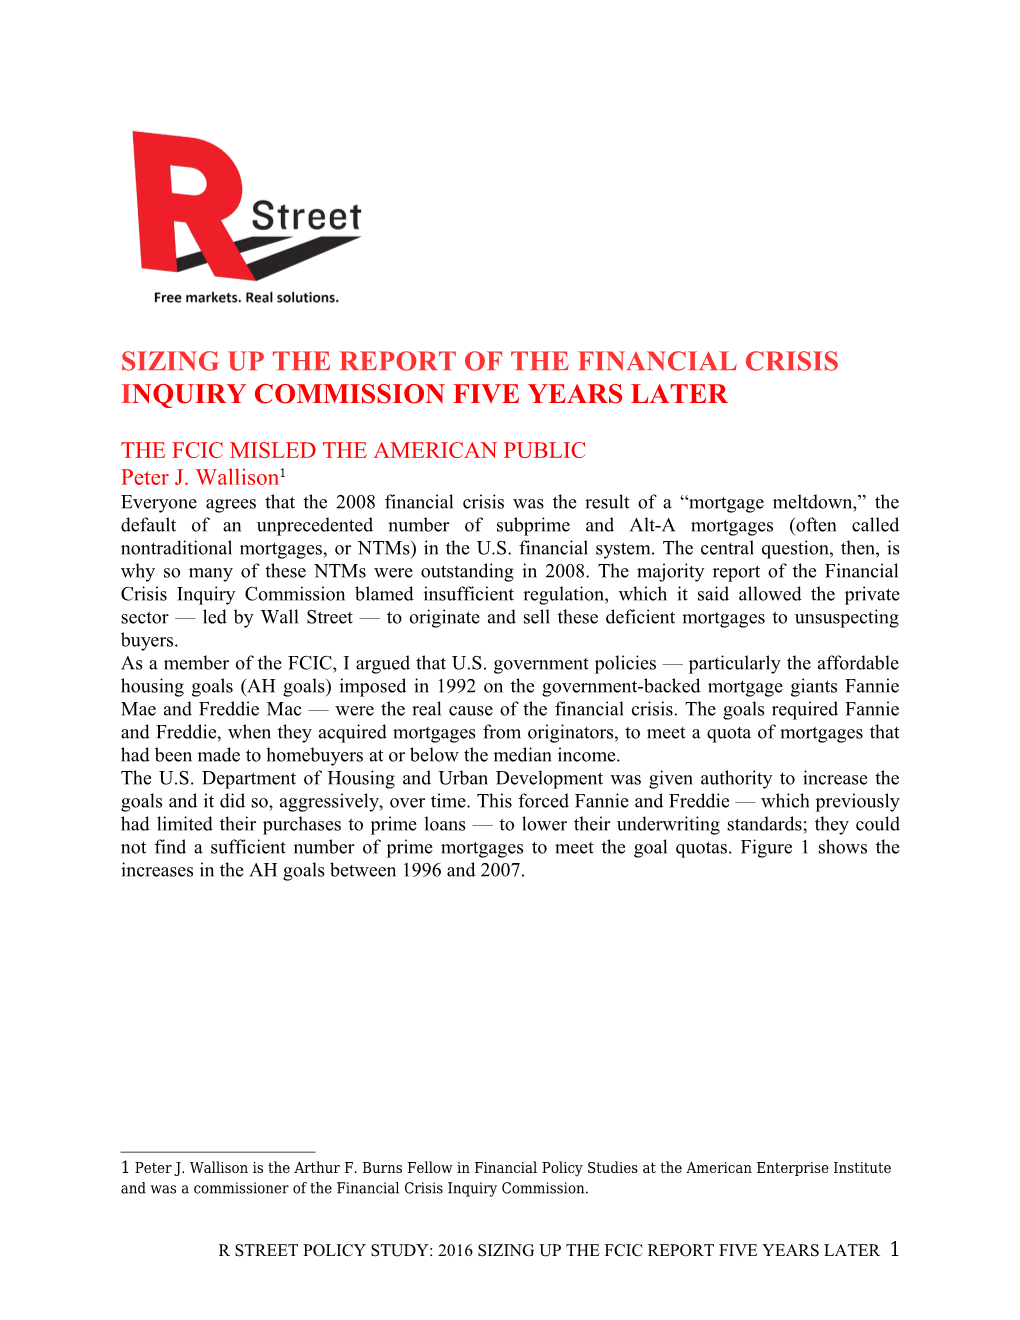 Sizing up the Report of the Financial Crisis Inquiry Commission Five Years Later